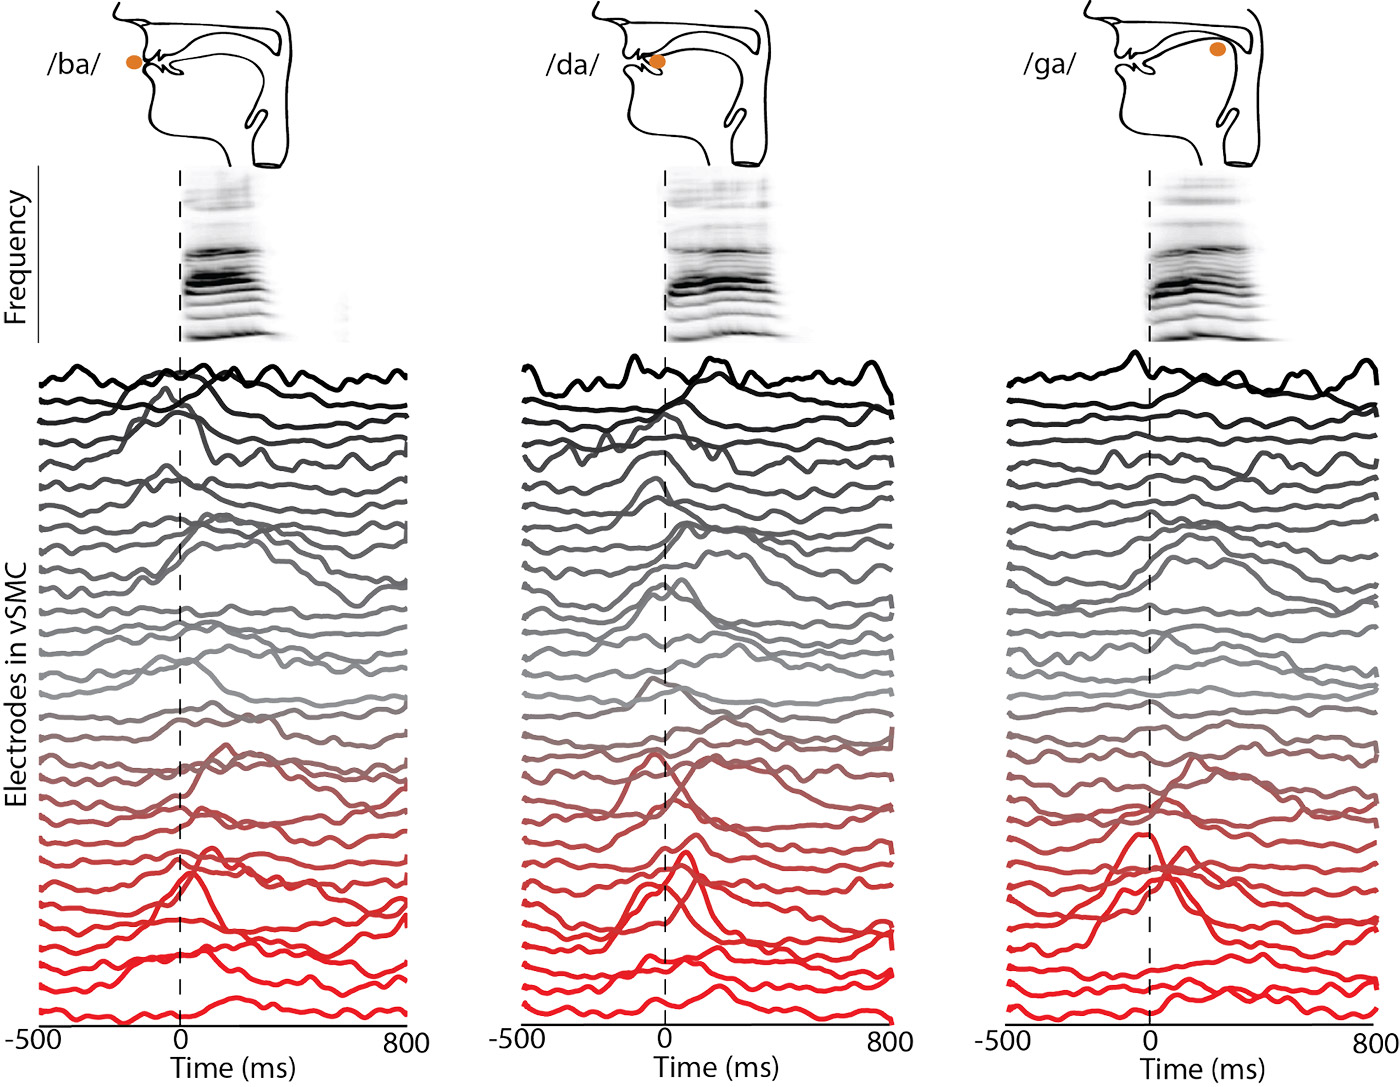 Neural recordings from the human cortical surface during the production of speech